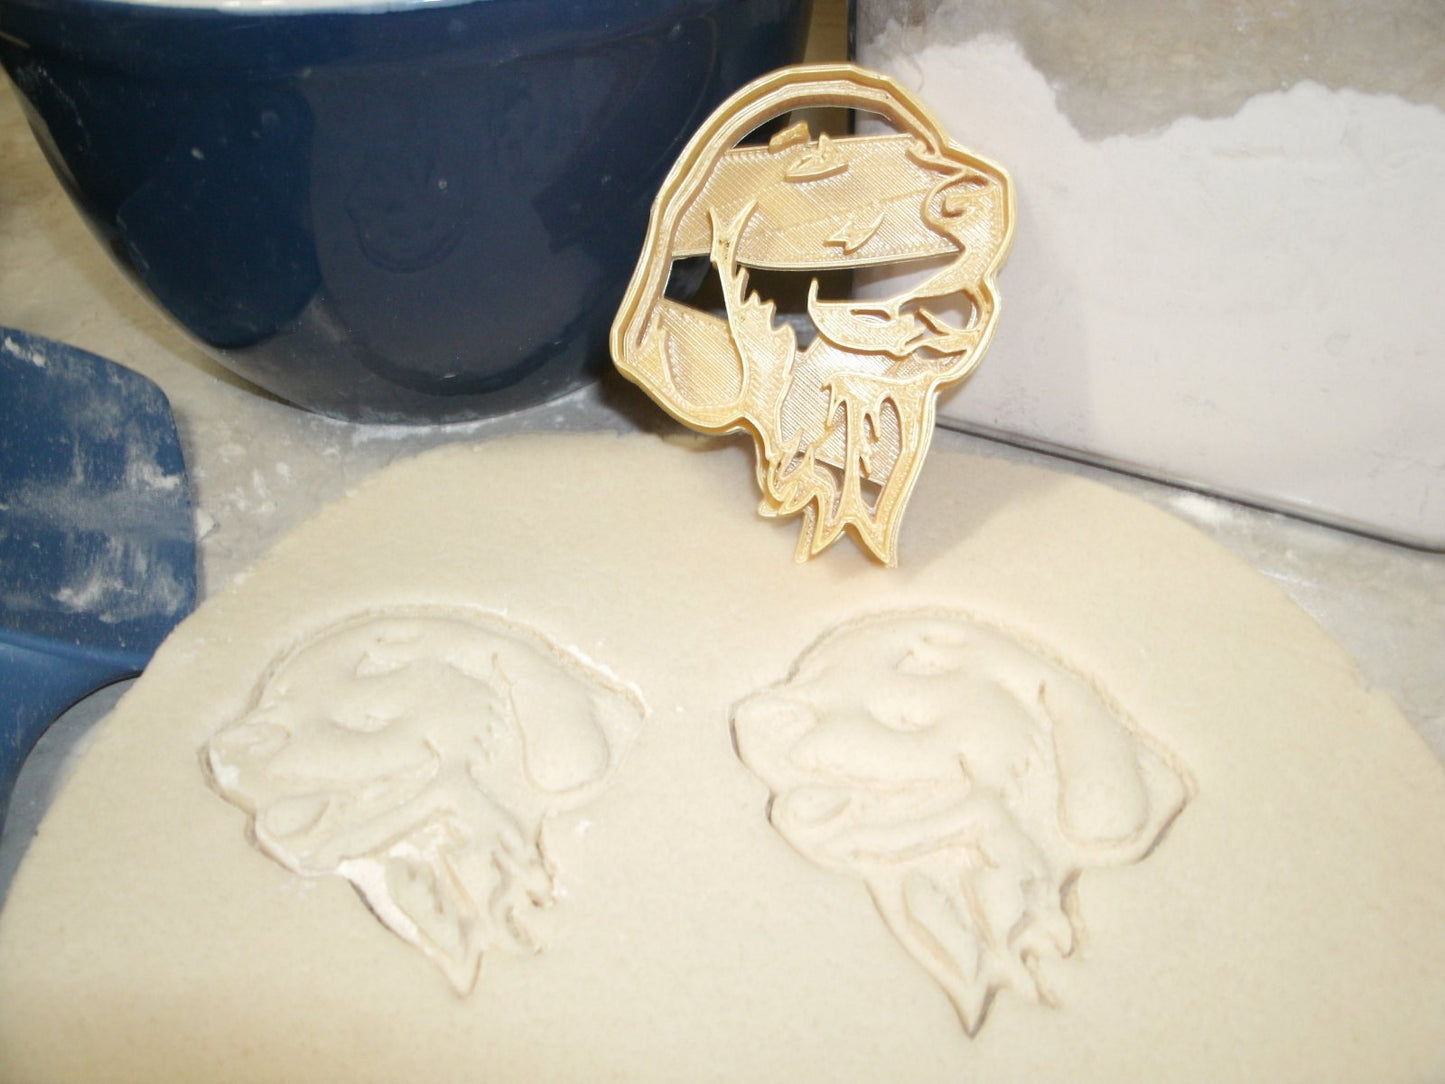 Dog Animal Lover Pup Puppies Doggies Set of 8 Cookie Cutters USA PR1035